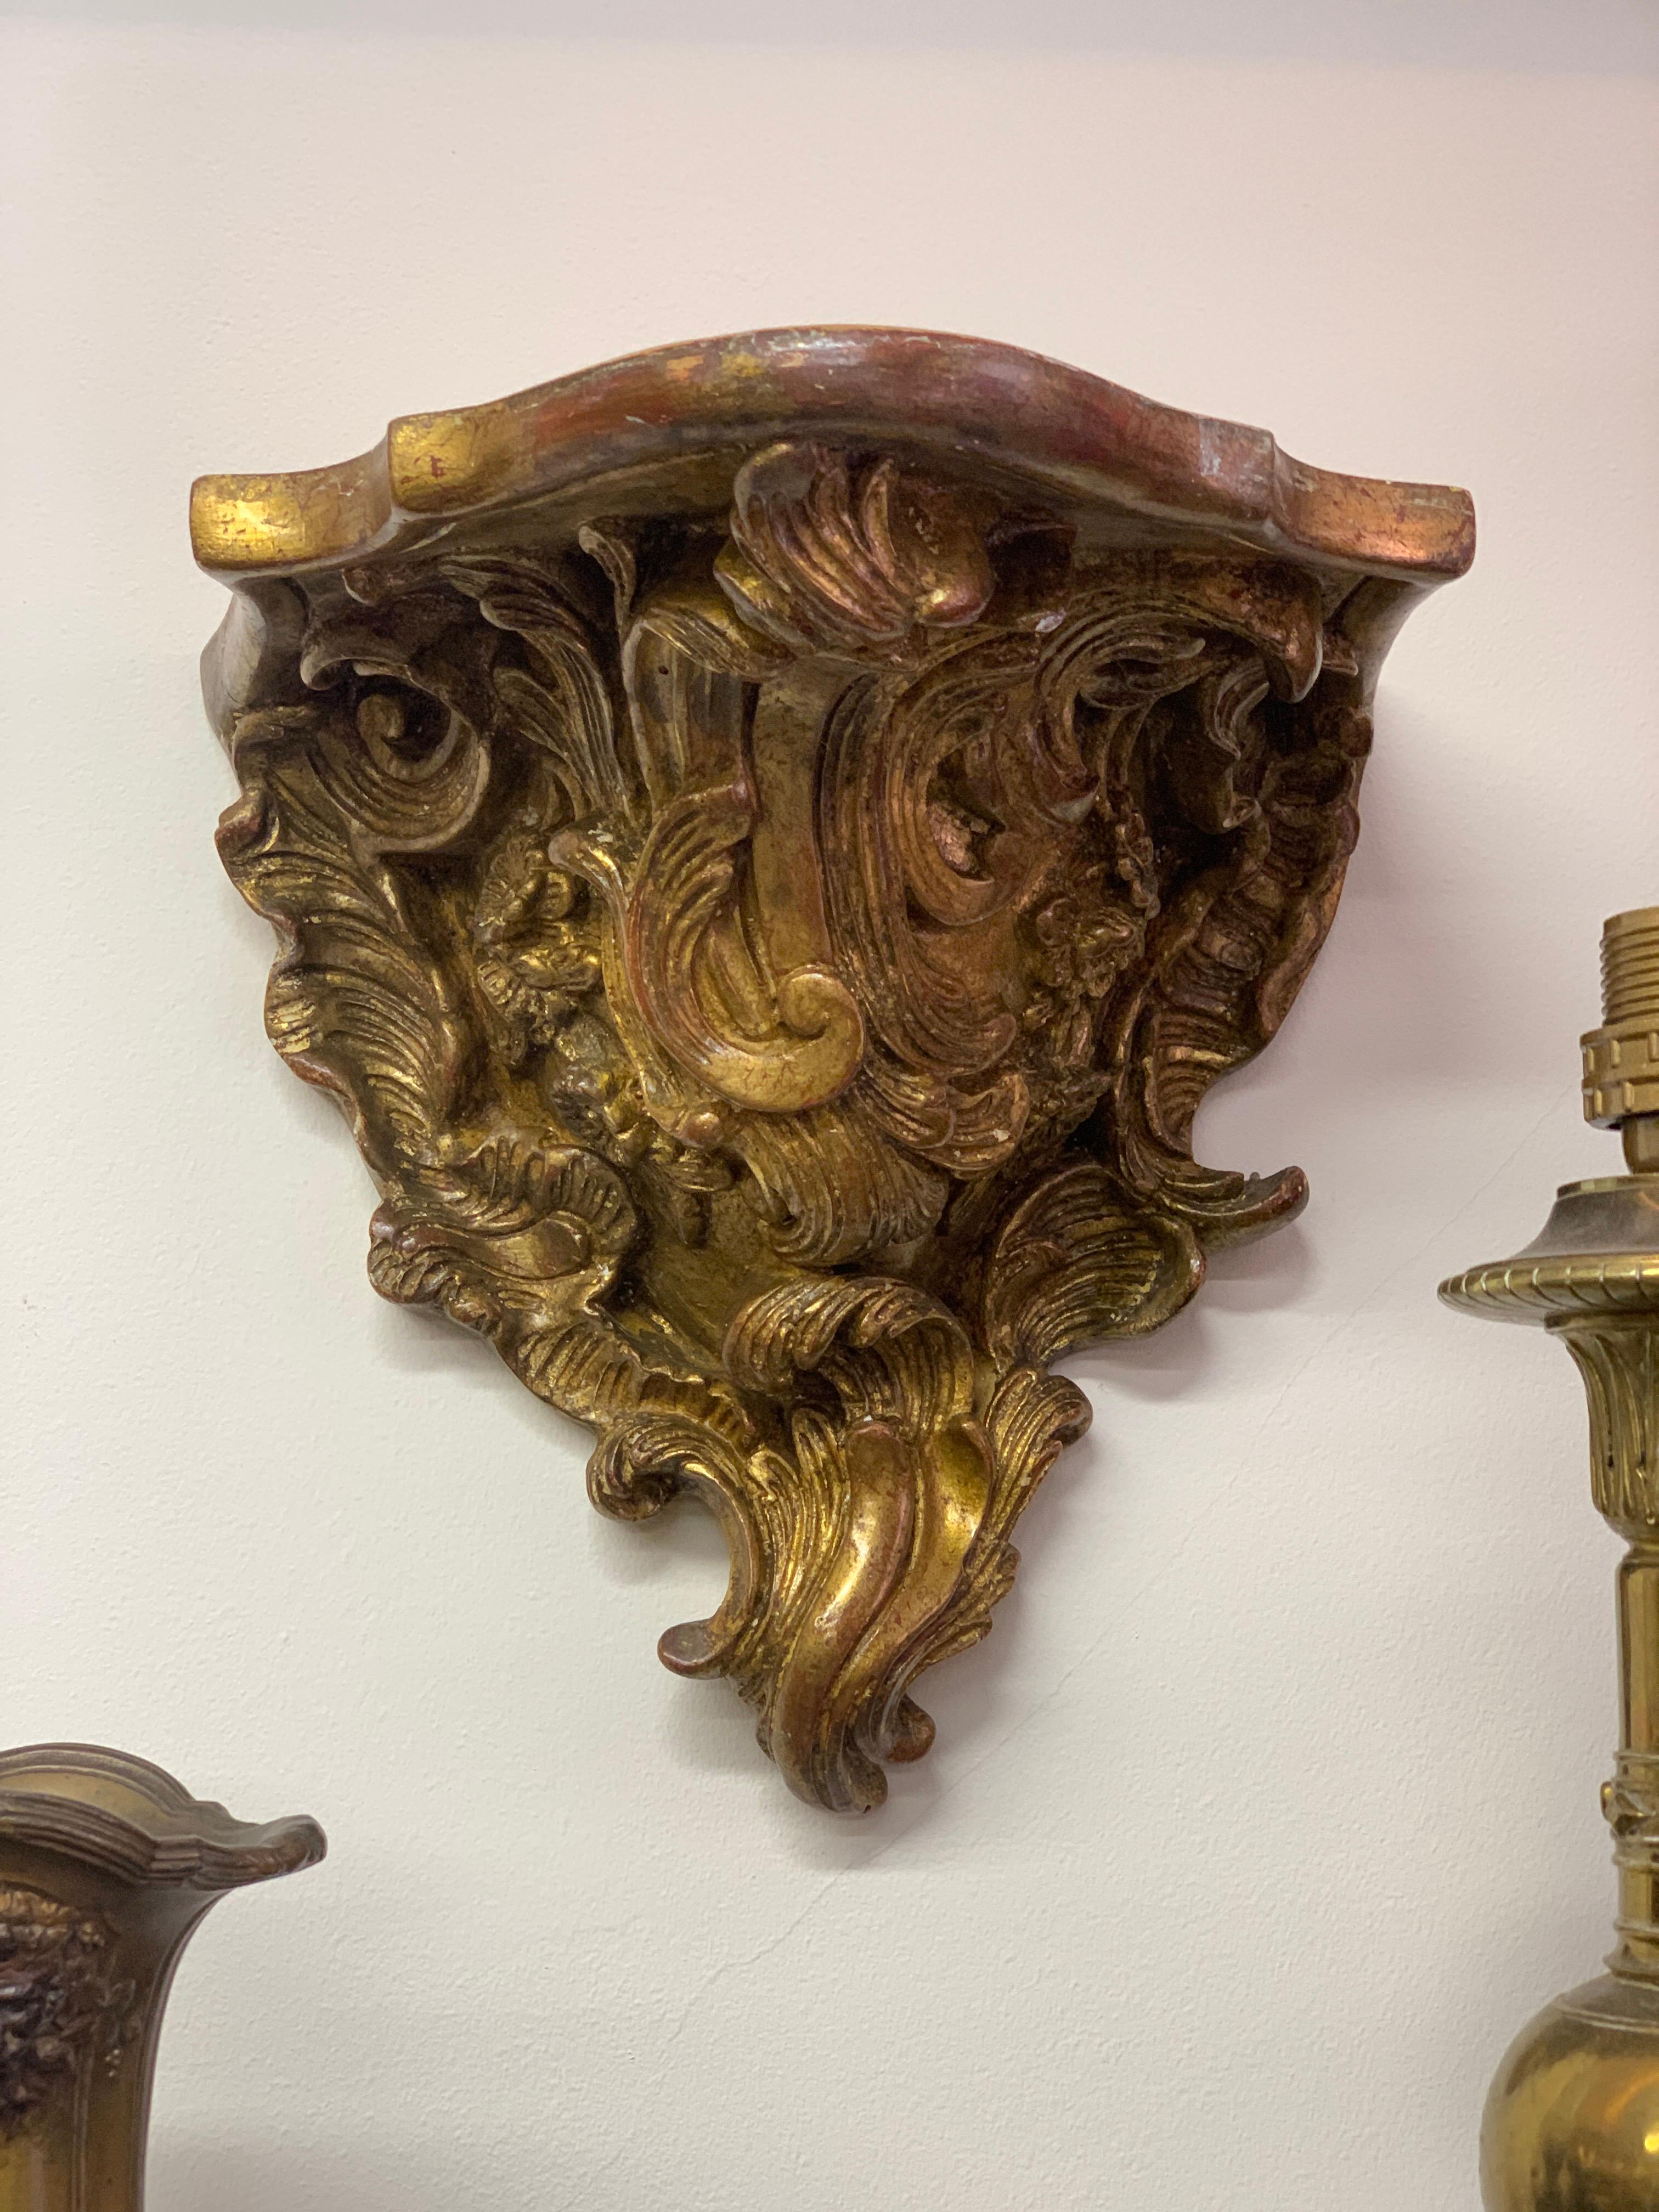 18th century wall suspended consoles from France. Beautifully constructed in gilt wood and ornamented with a Rococo influence. The quality of the carving and gilding is very good and they fit perfect on any wall especially under columns. There is a